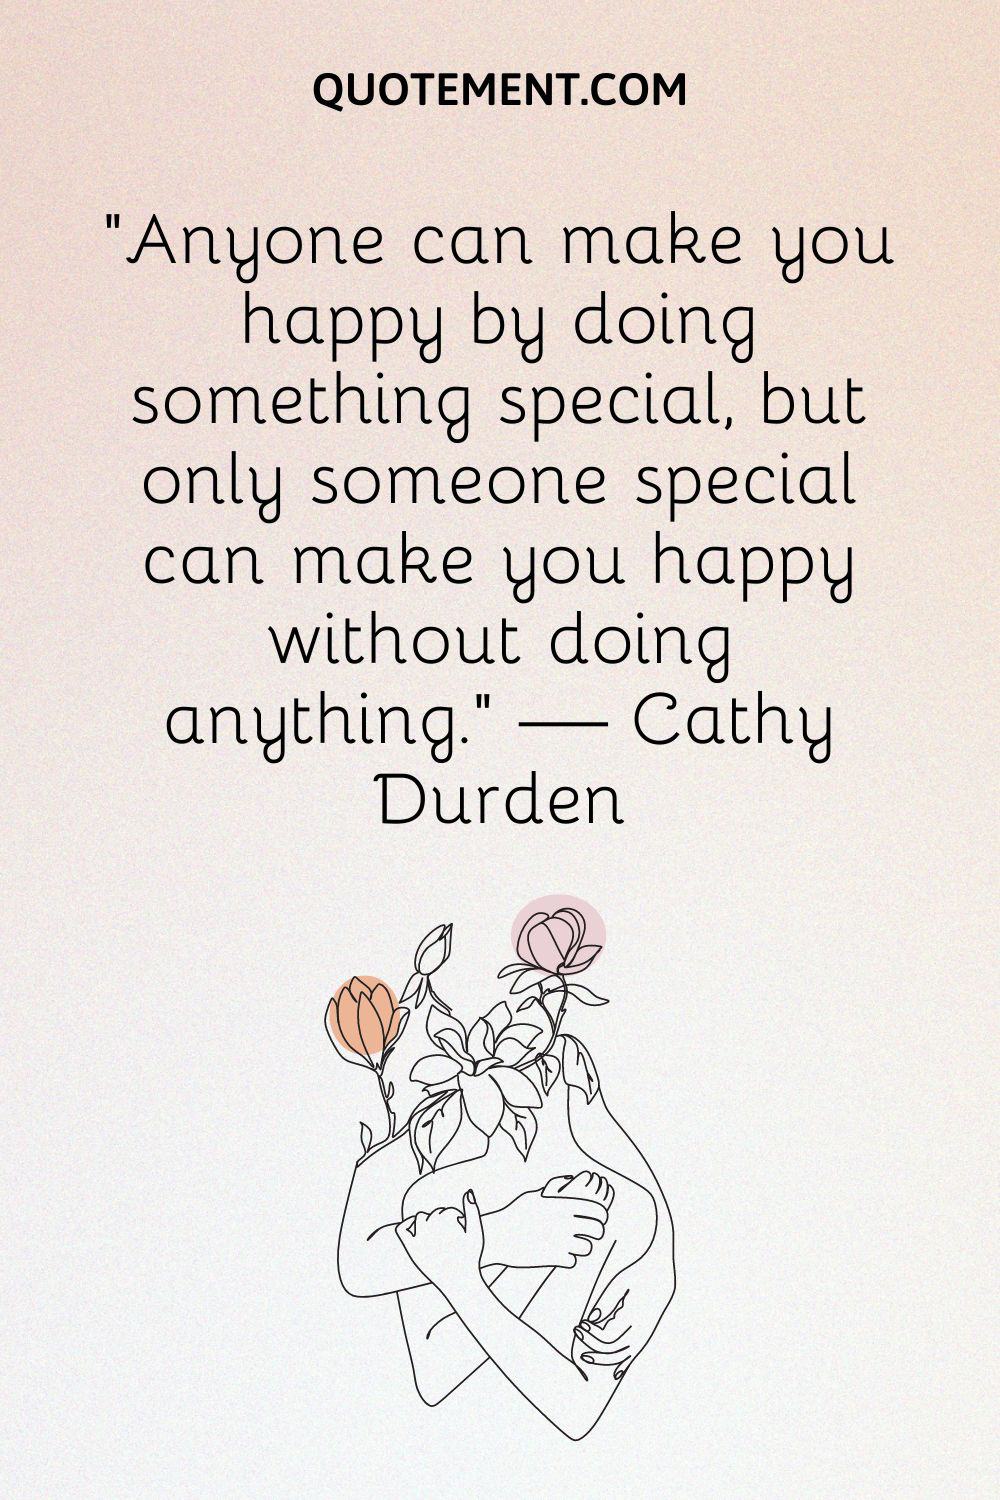 Anyone can make you happy by doing something special